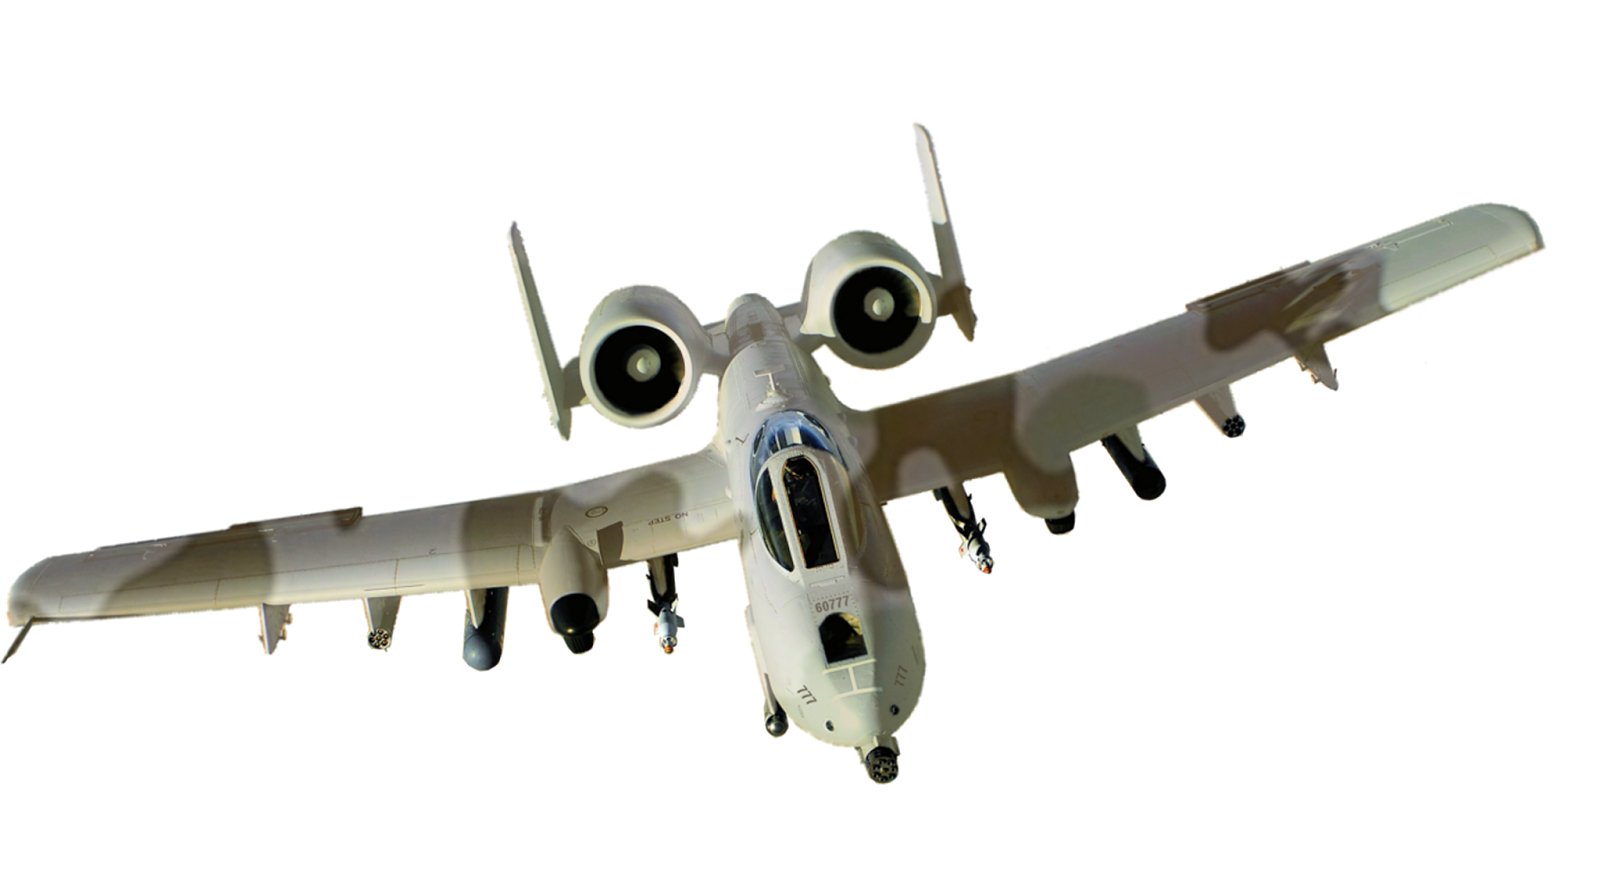 A-10 Warthog Silhouette #1411832 (License: Personal Use) .